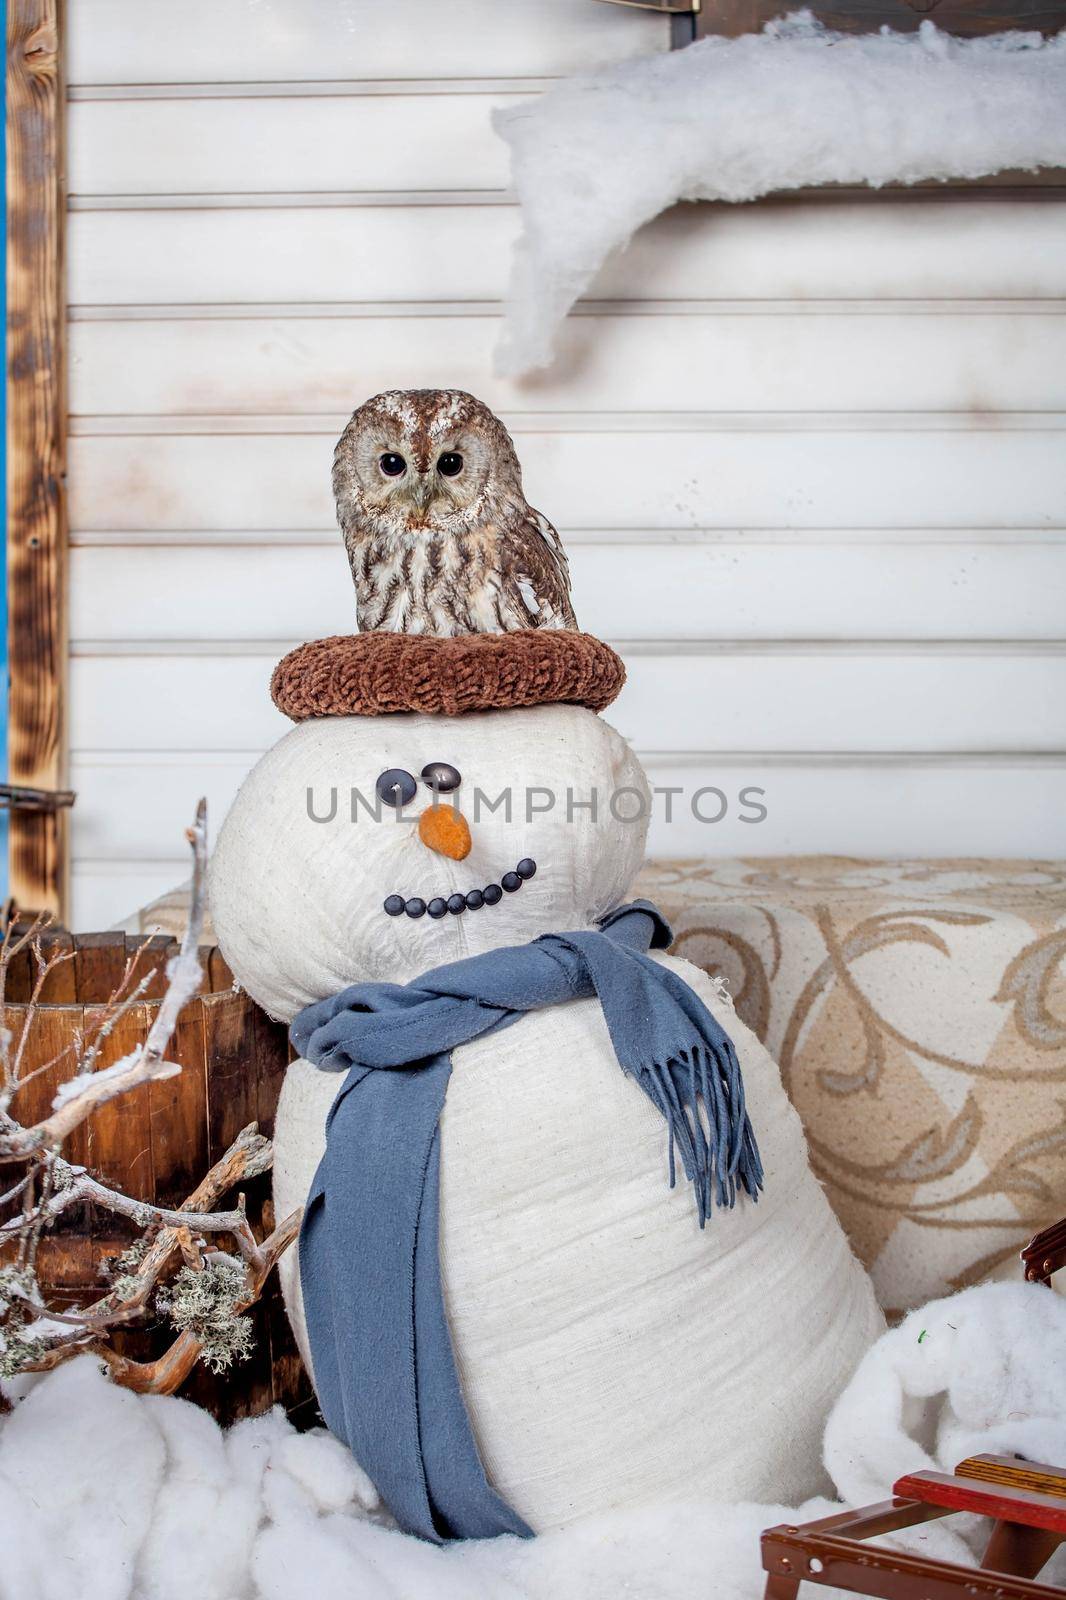 Tawny or Brown Owl, Strix aluco, on snowman by RosaJay